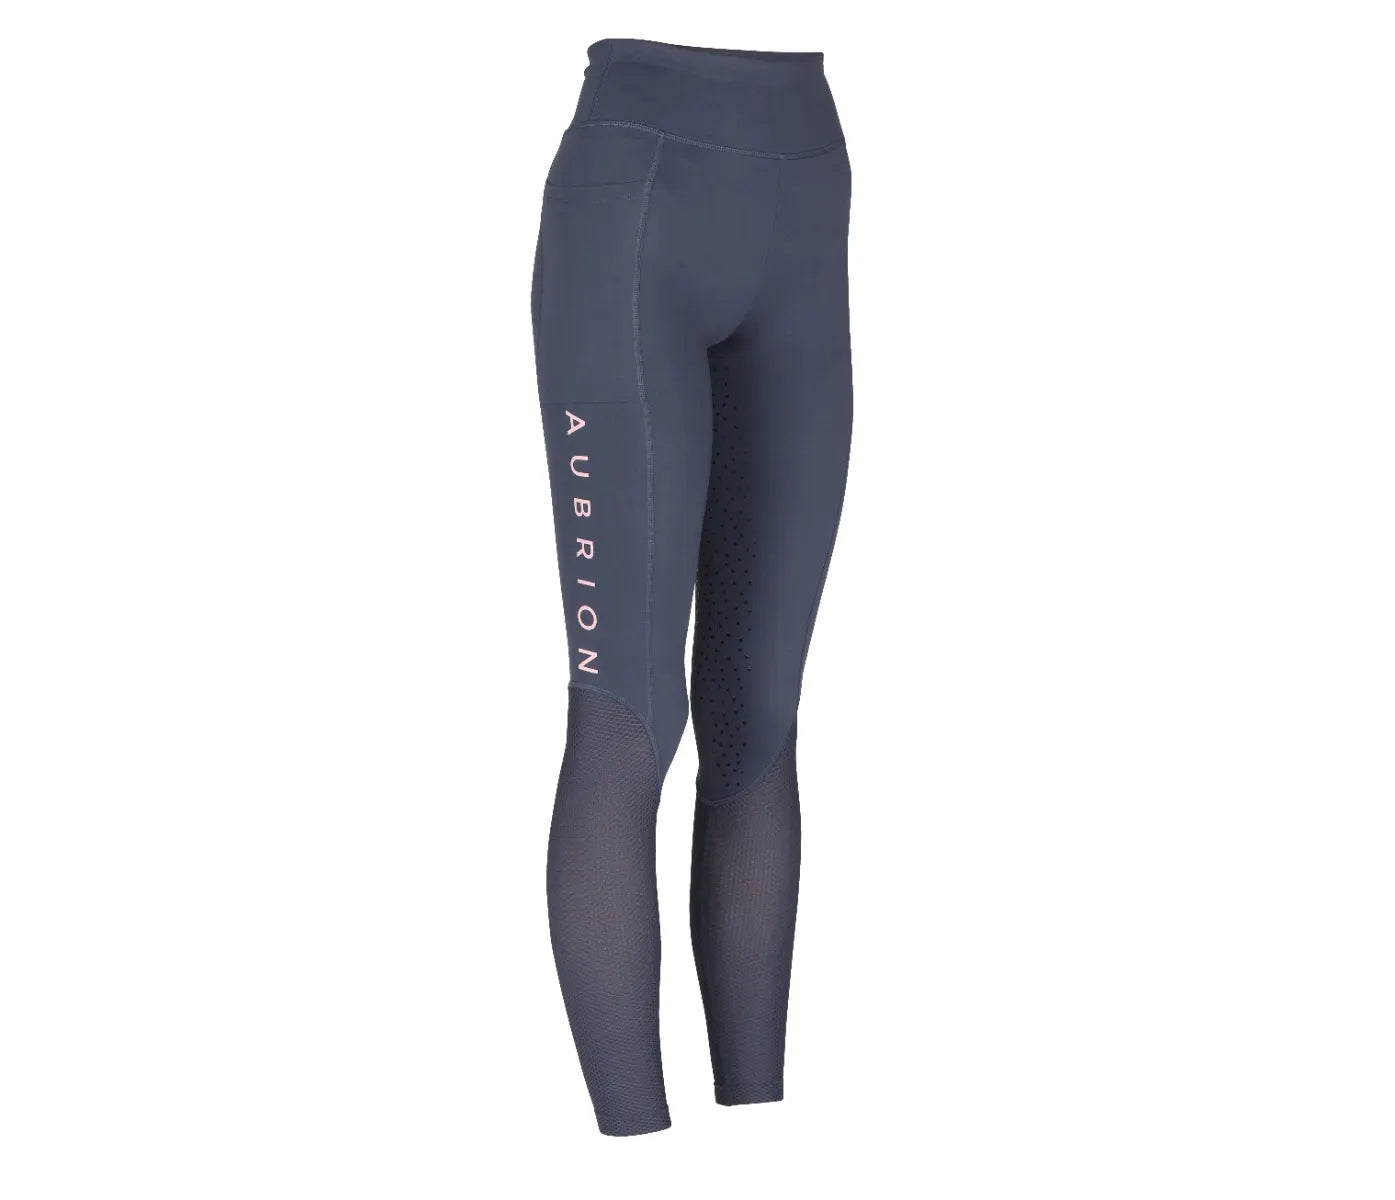 Horse Riding Tights & Breeches – Saddle Up & Ride